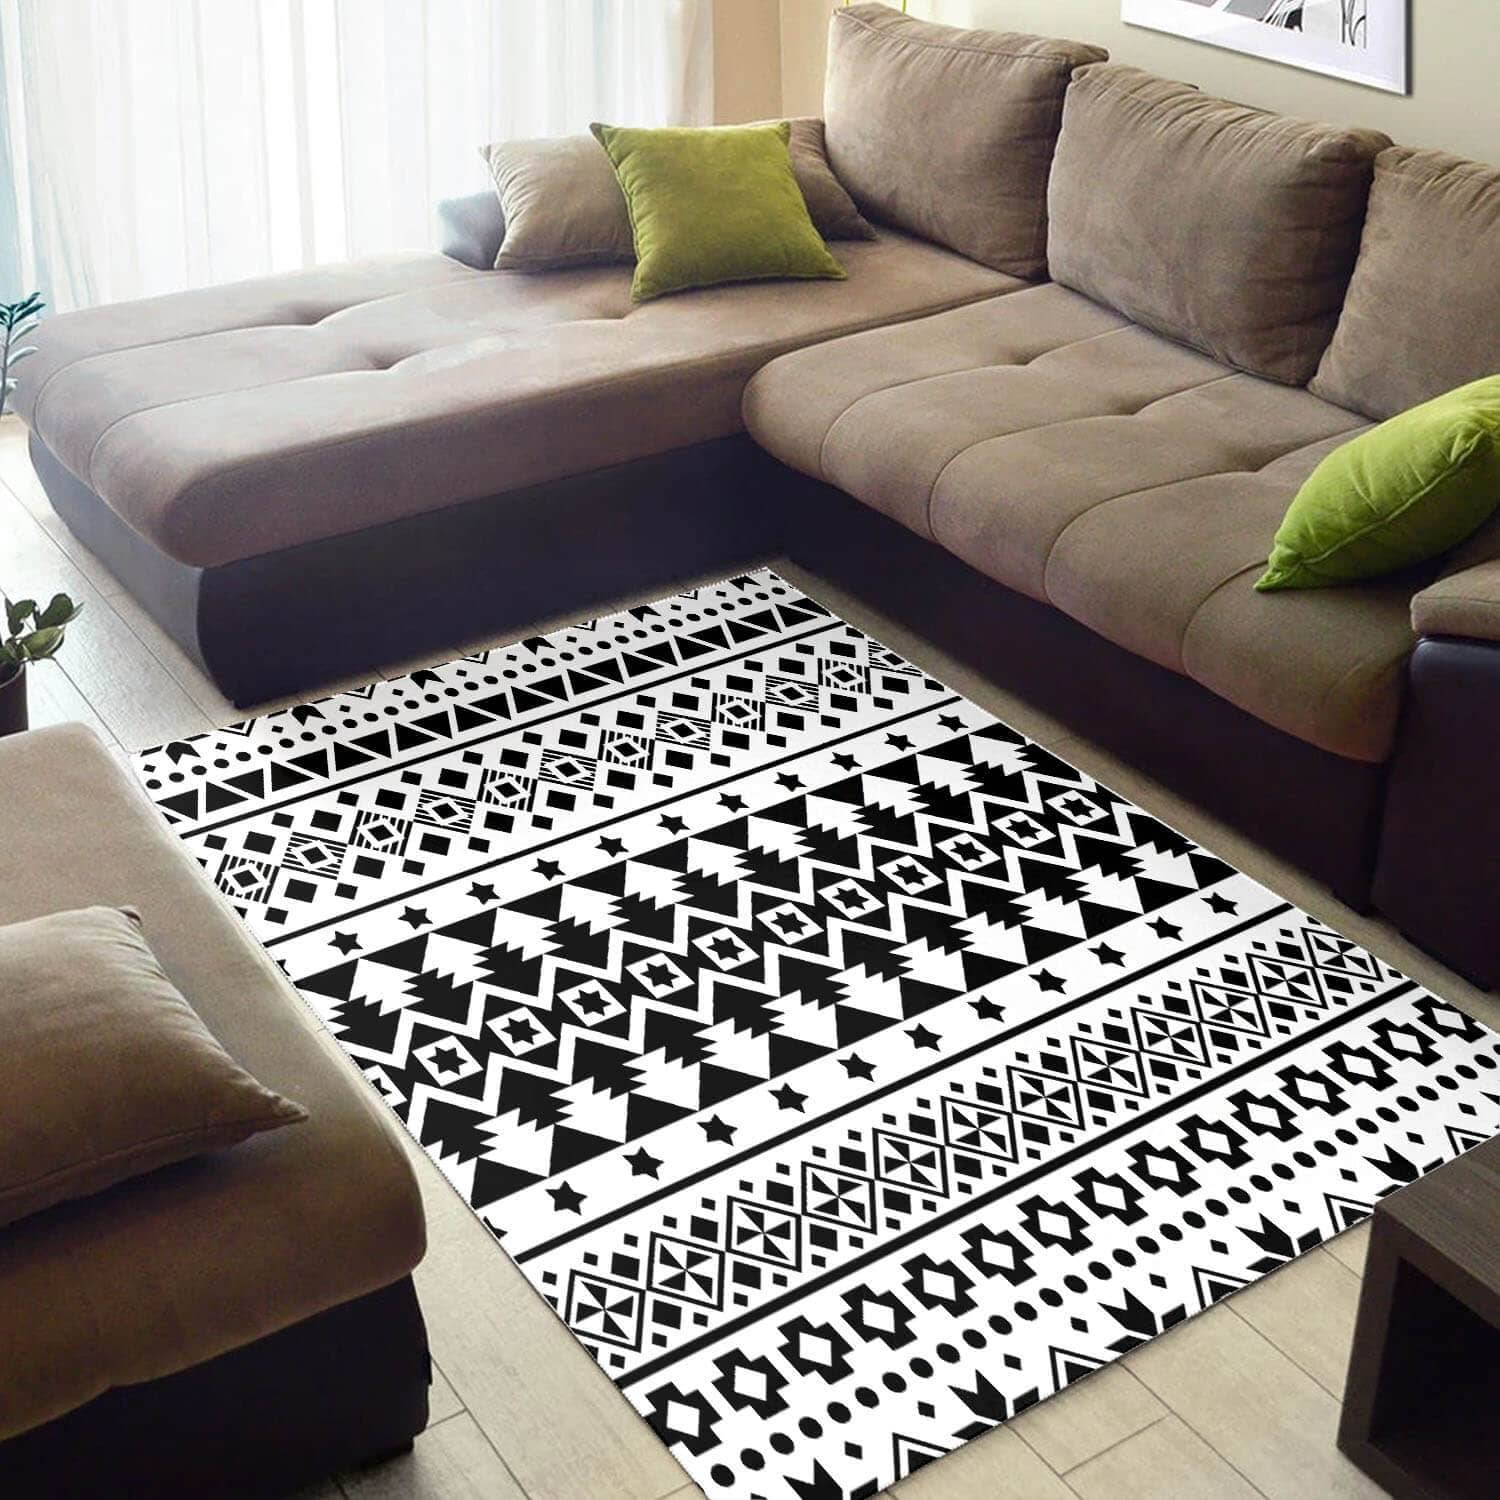 Nice African American Themed Seamless Pattern Large Carpet Room Rug